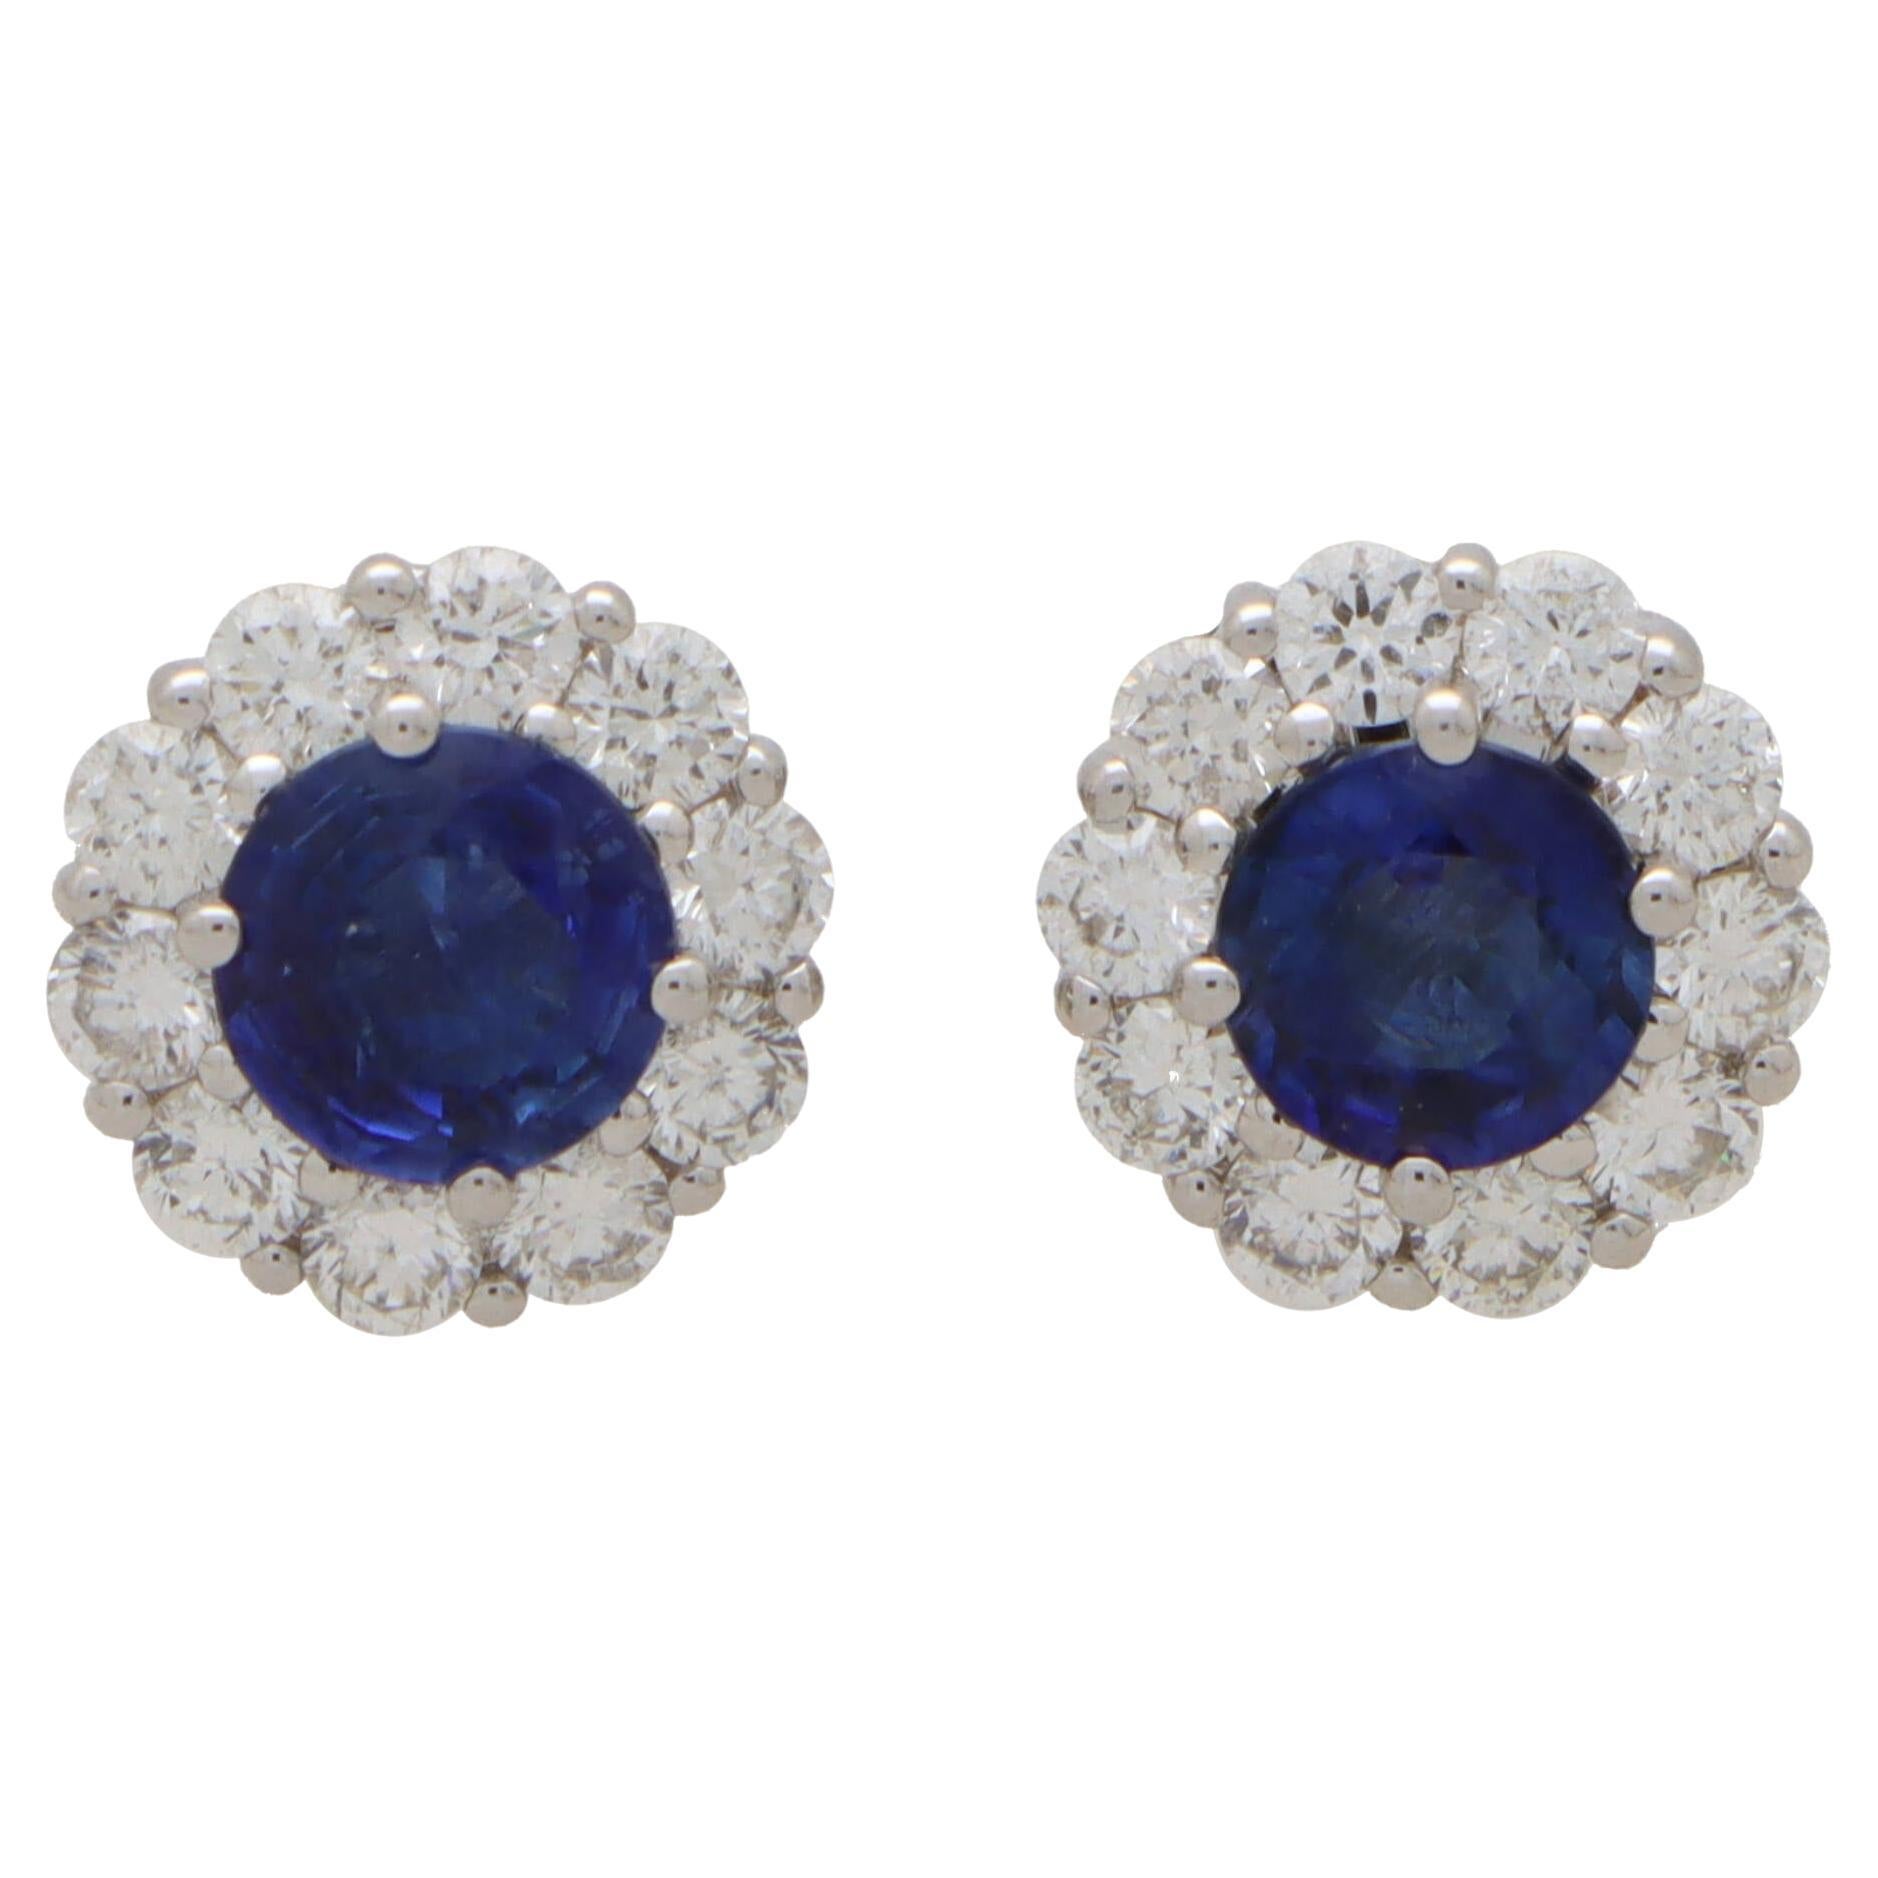 Contemporary Blue Sapphire and Diamond Cluster Earrings in 18k White Gold